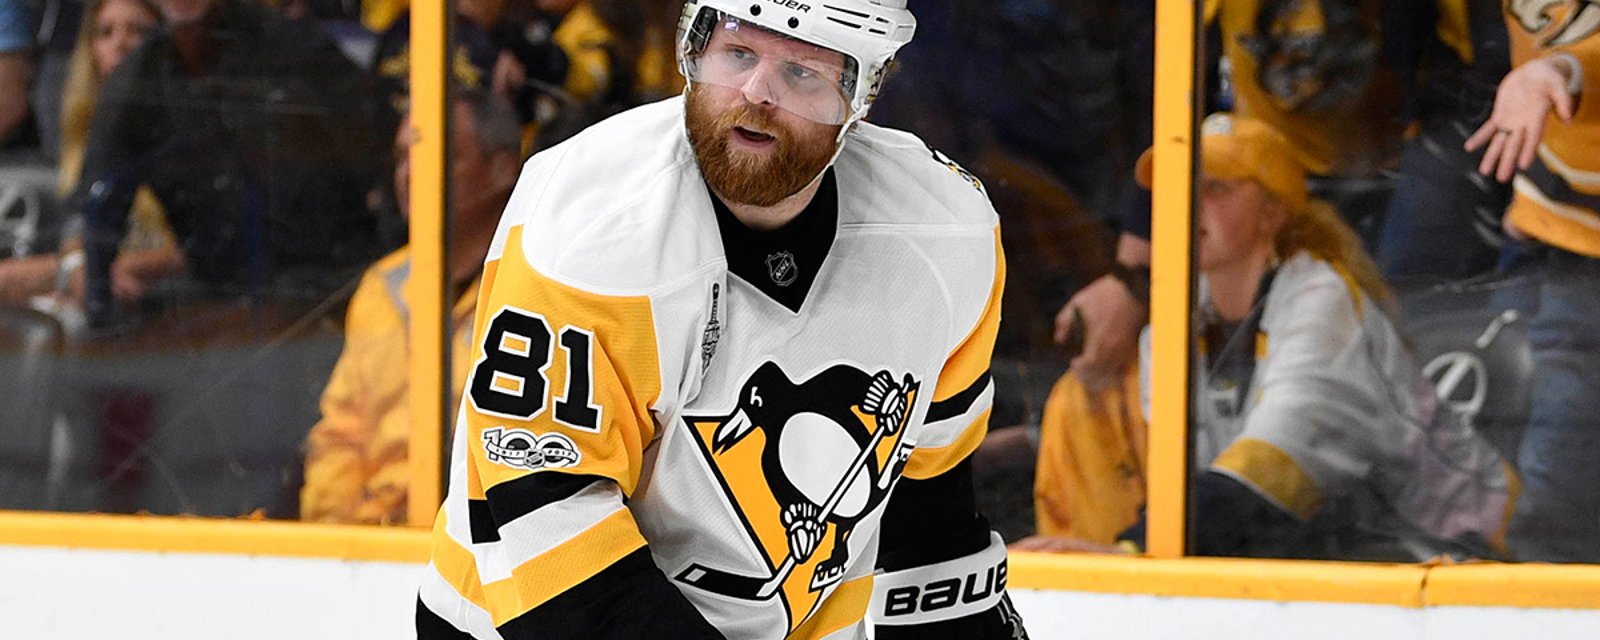 Insider Report: Penguins “would love” to move Kessel